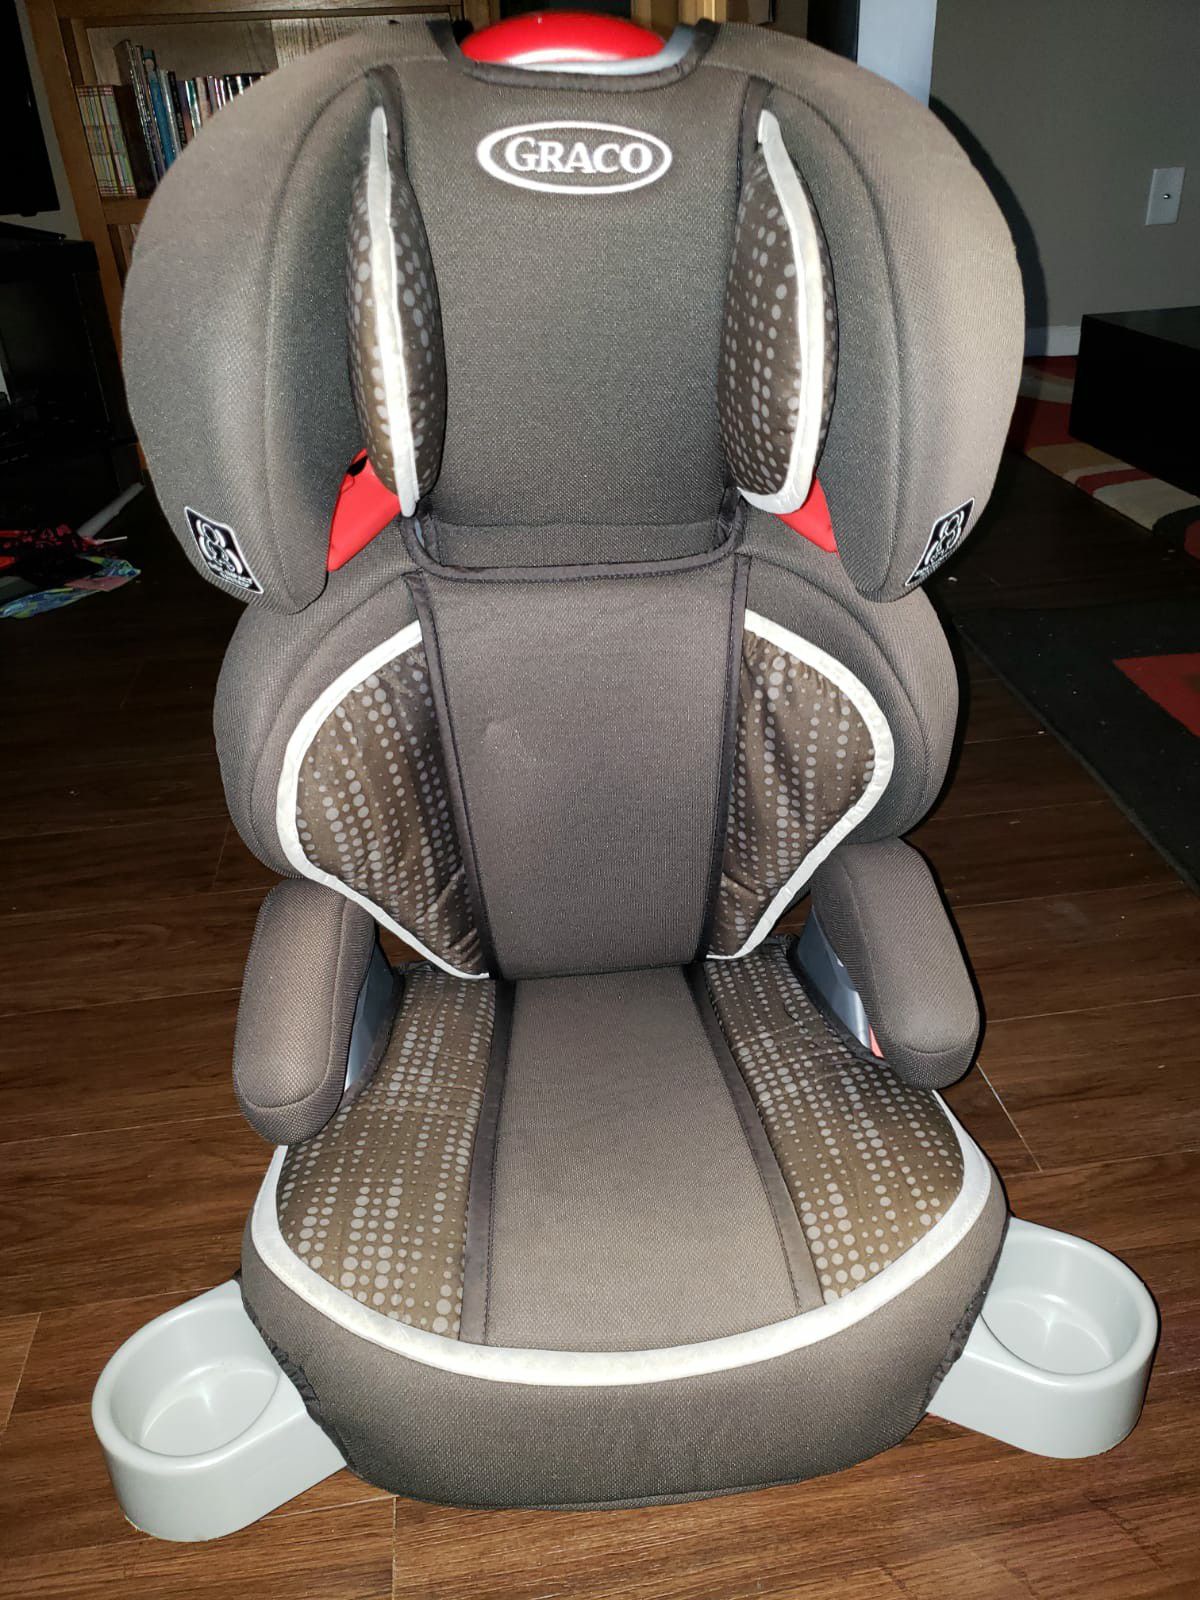 Graco toddler 2in1 turbobooster highback car seat and turbobooster backless car seat. Both with bottle holder. In very good condition.